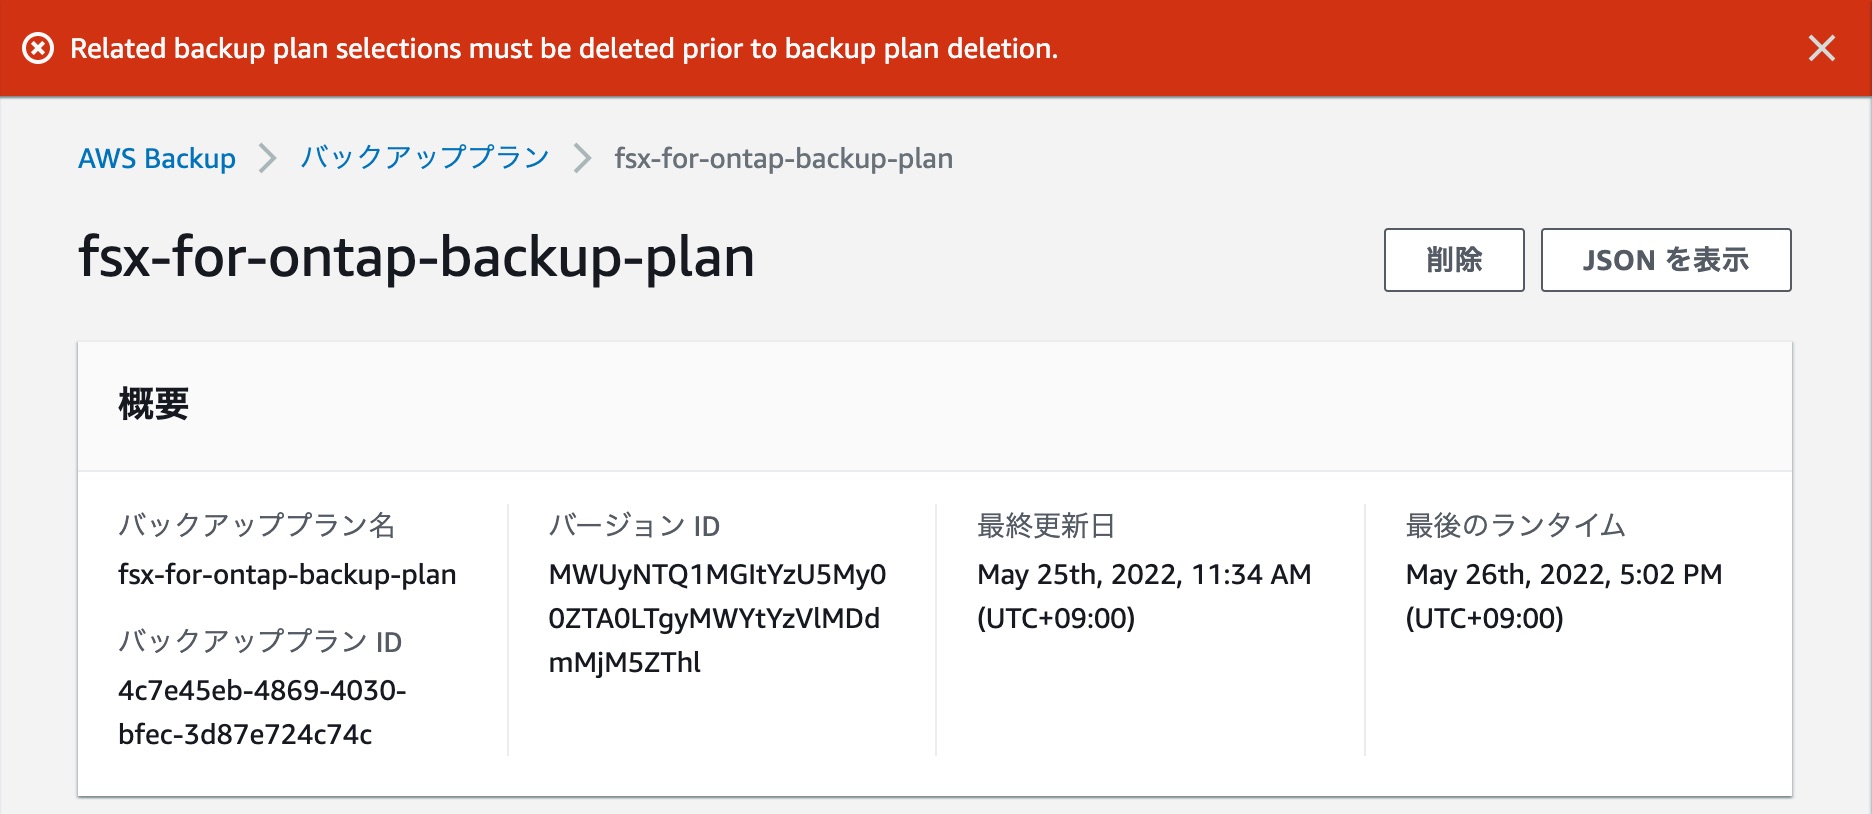 Related backup plan selections must be deleted prior to backup plan deletion.